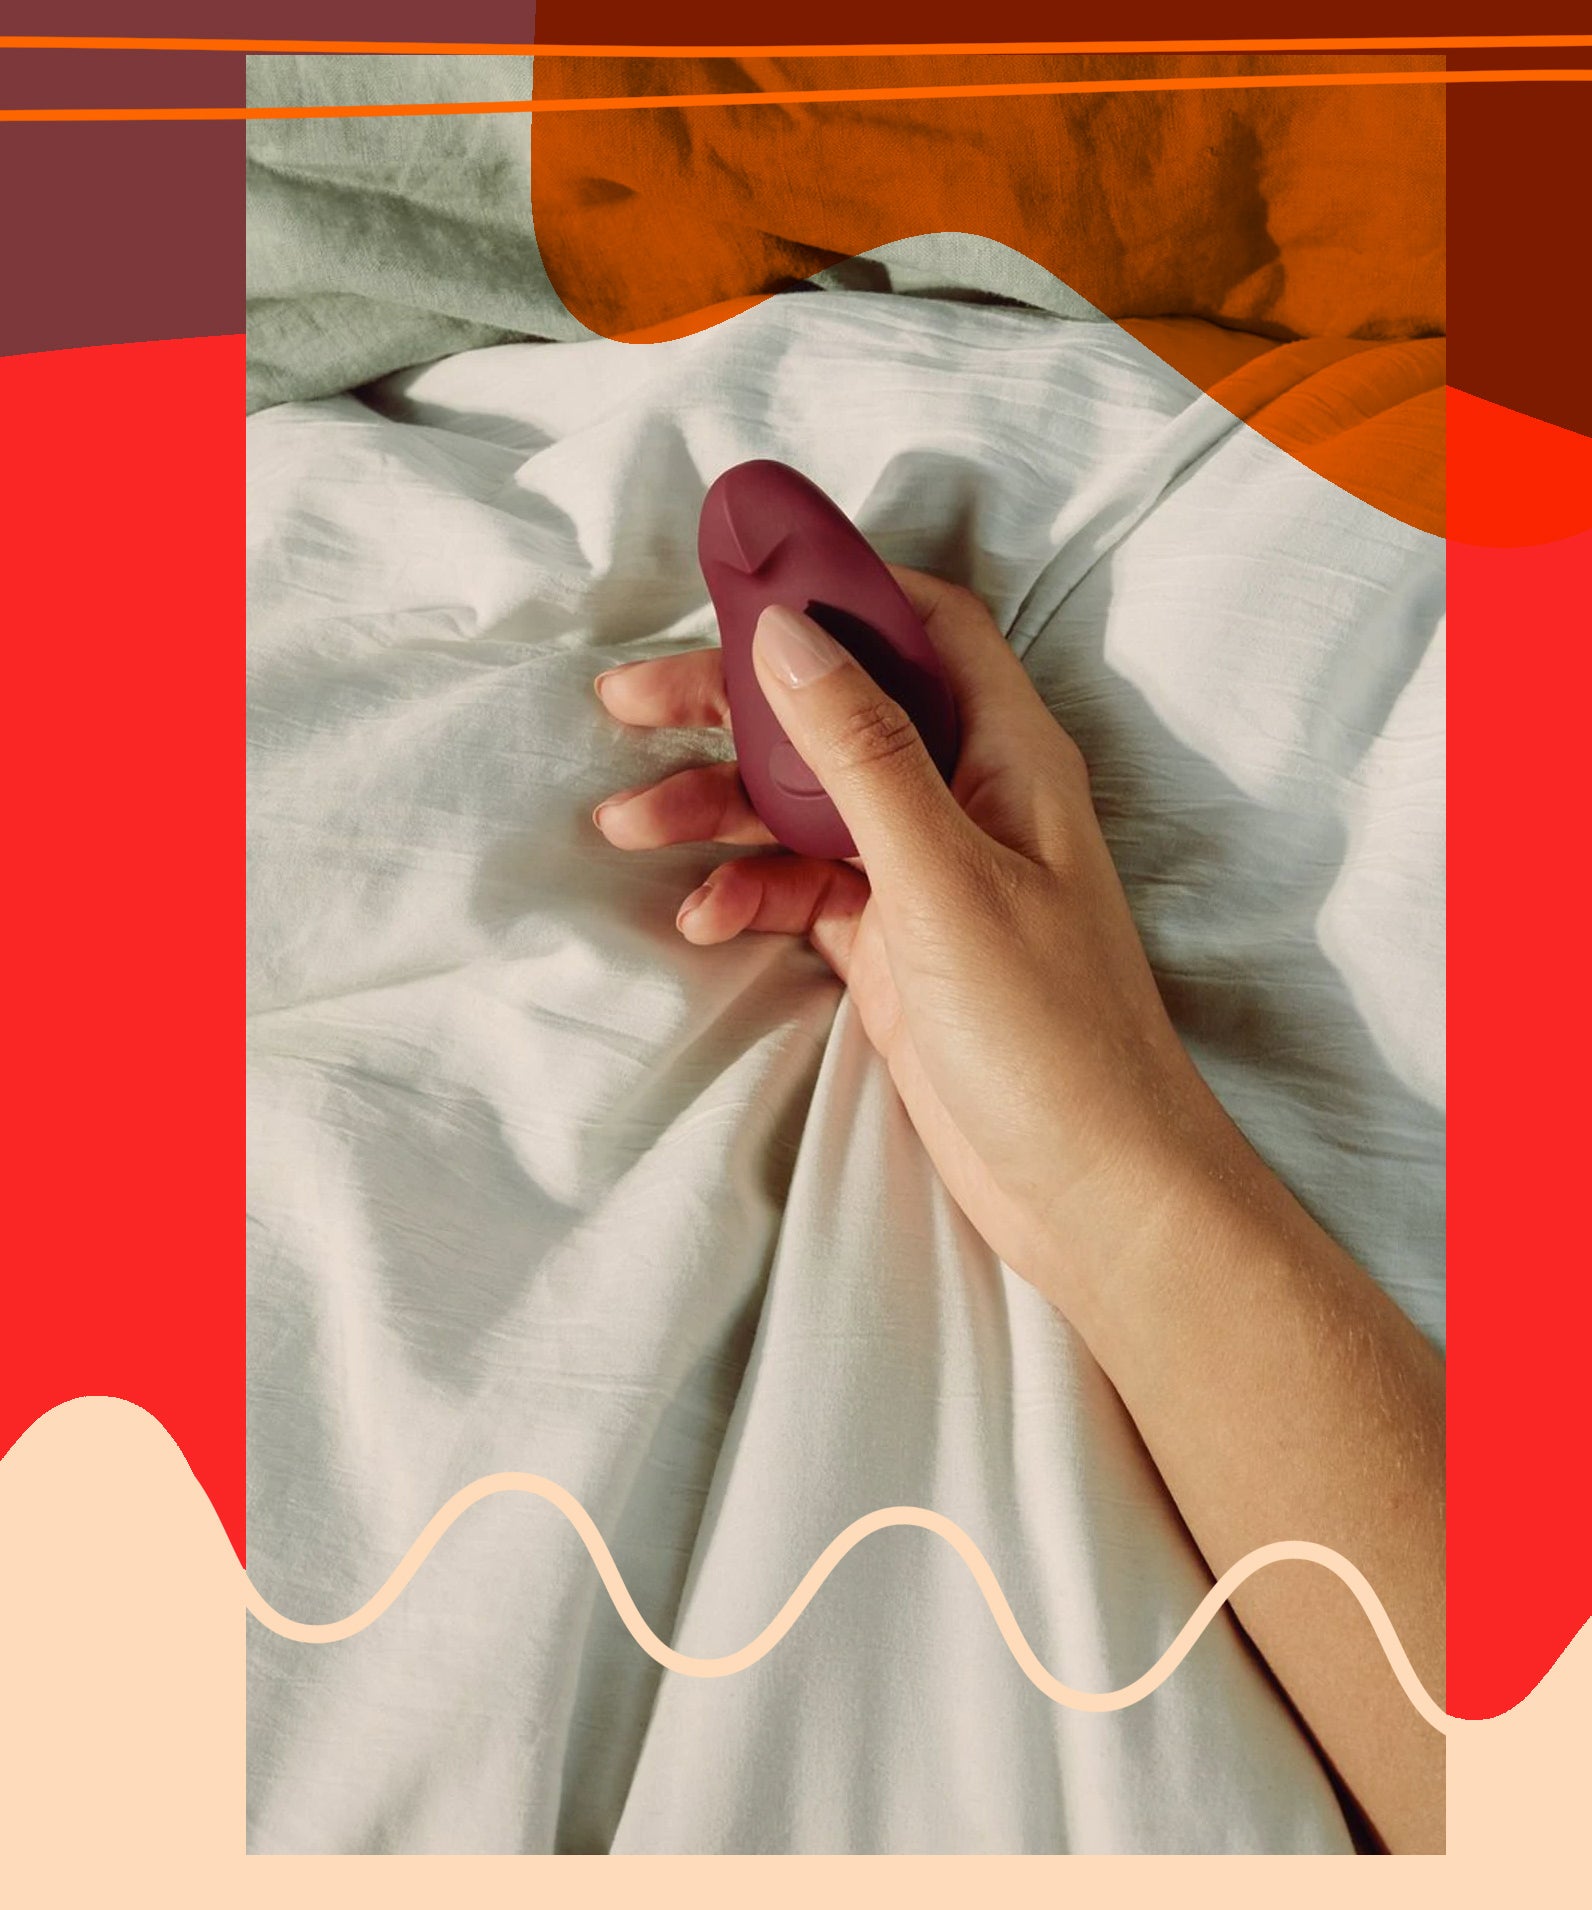 11 Vibrators For Sex Toy Beginners